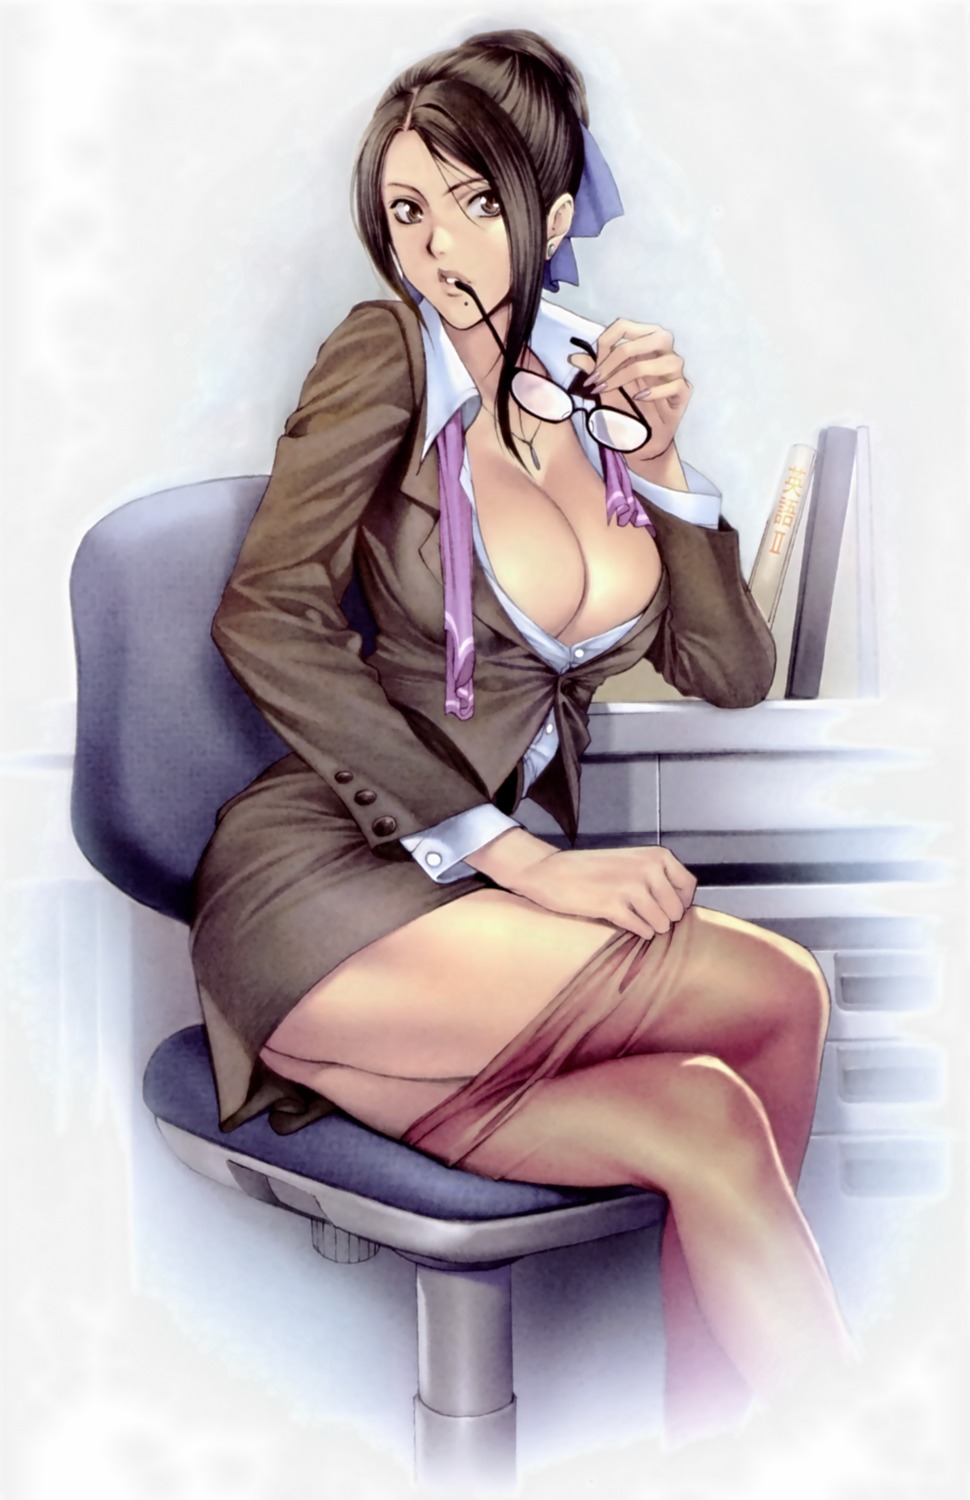 business_suit cleavage homare megane no_bra overfiltered pantyhose undressing